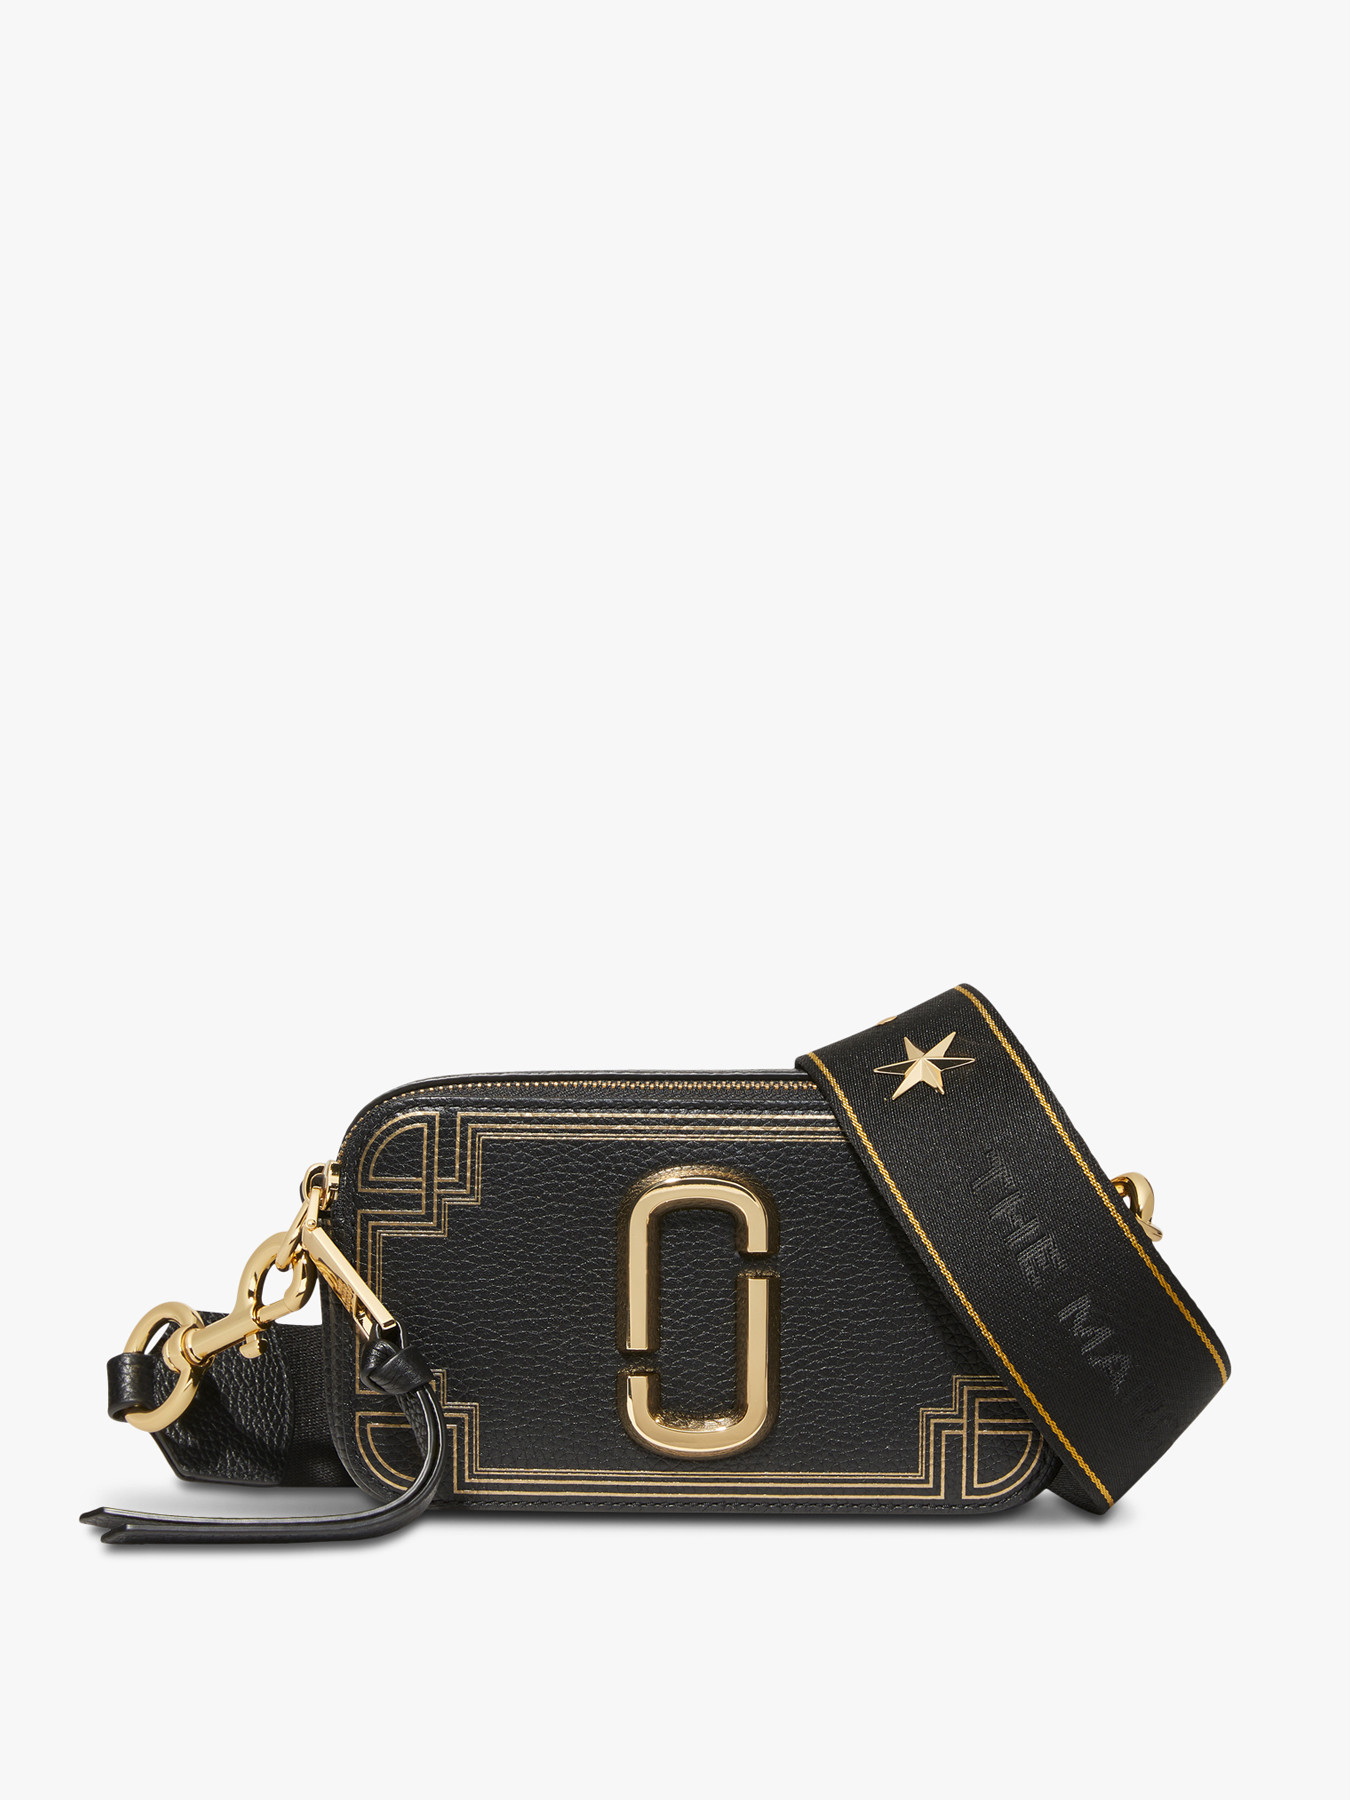 Marc Jacobs The Snapshot Gilded Bag in Black